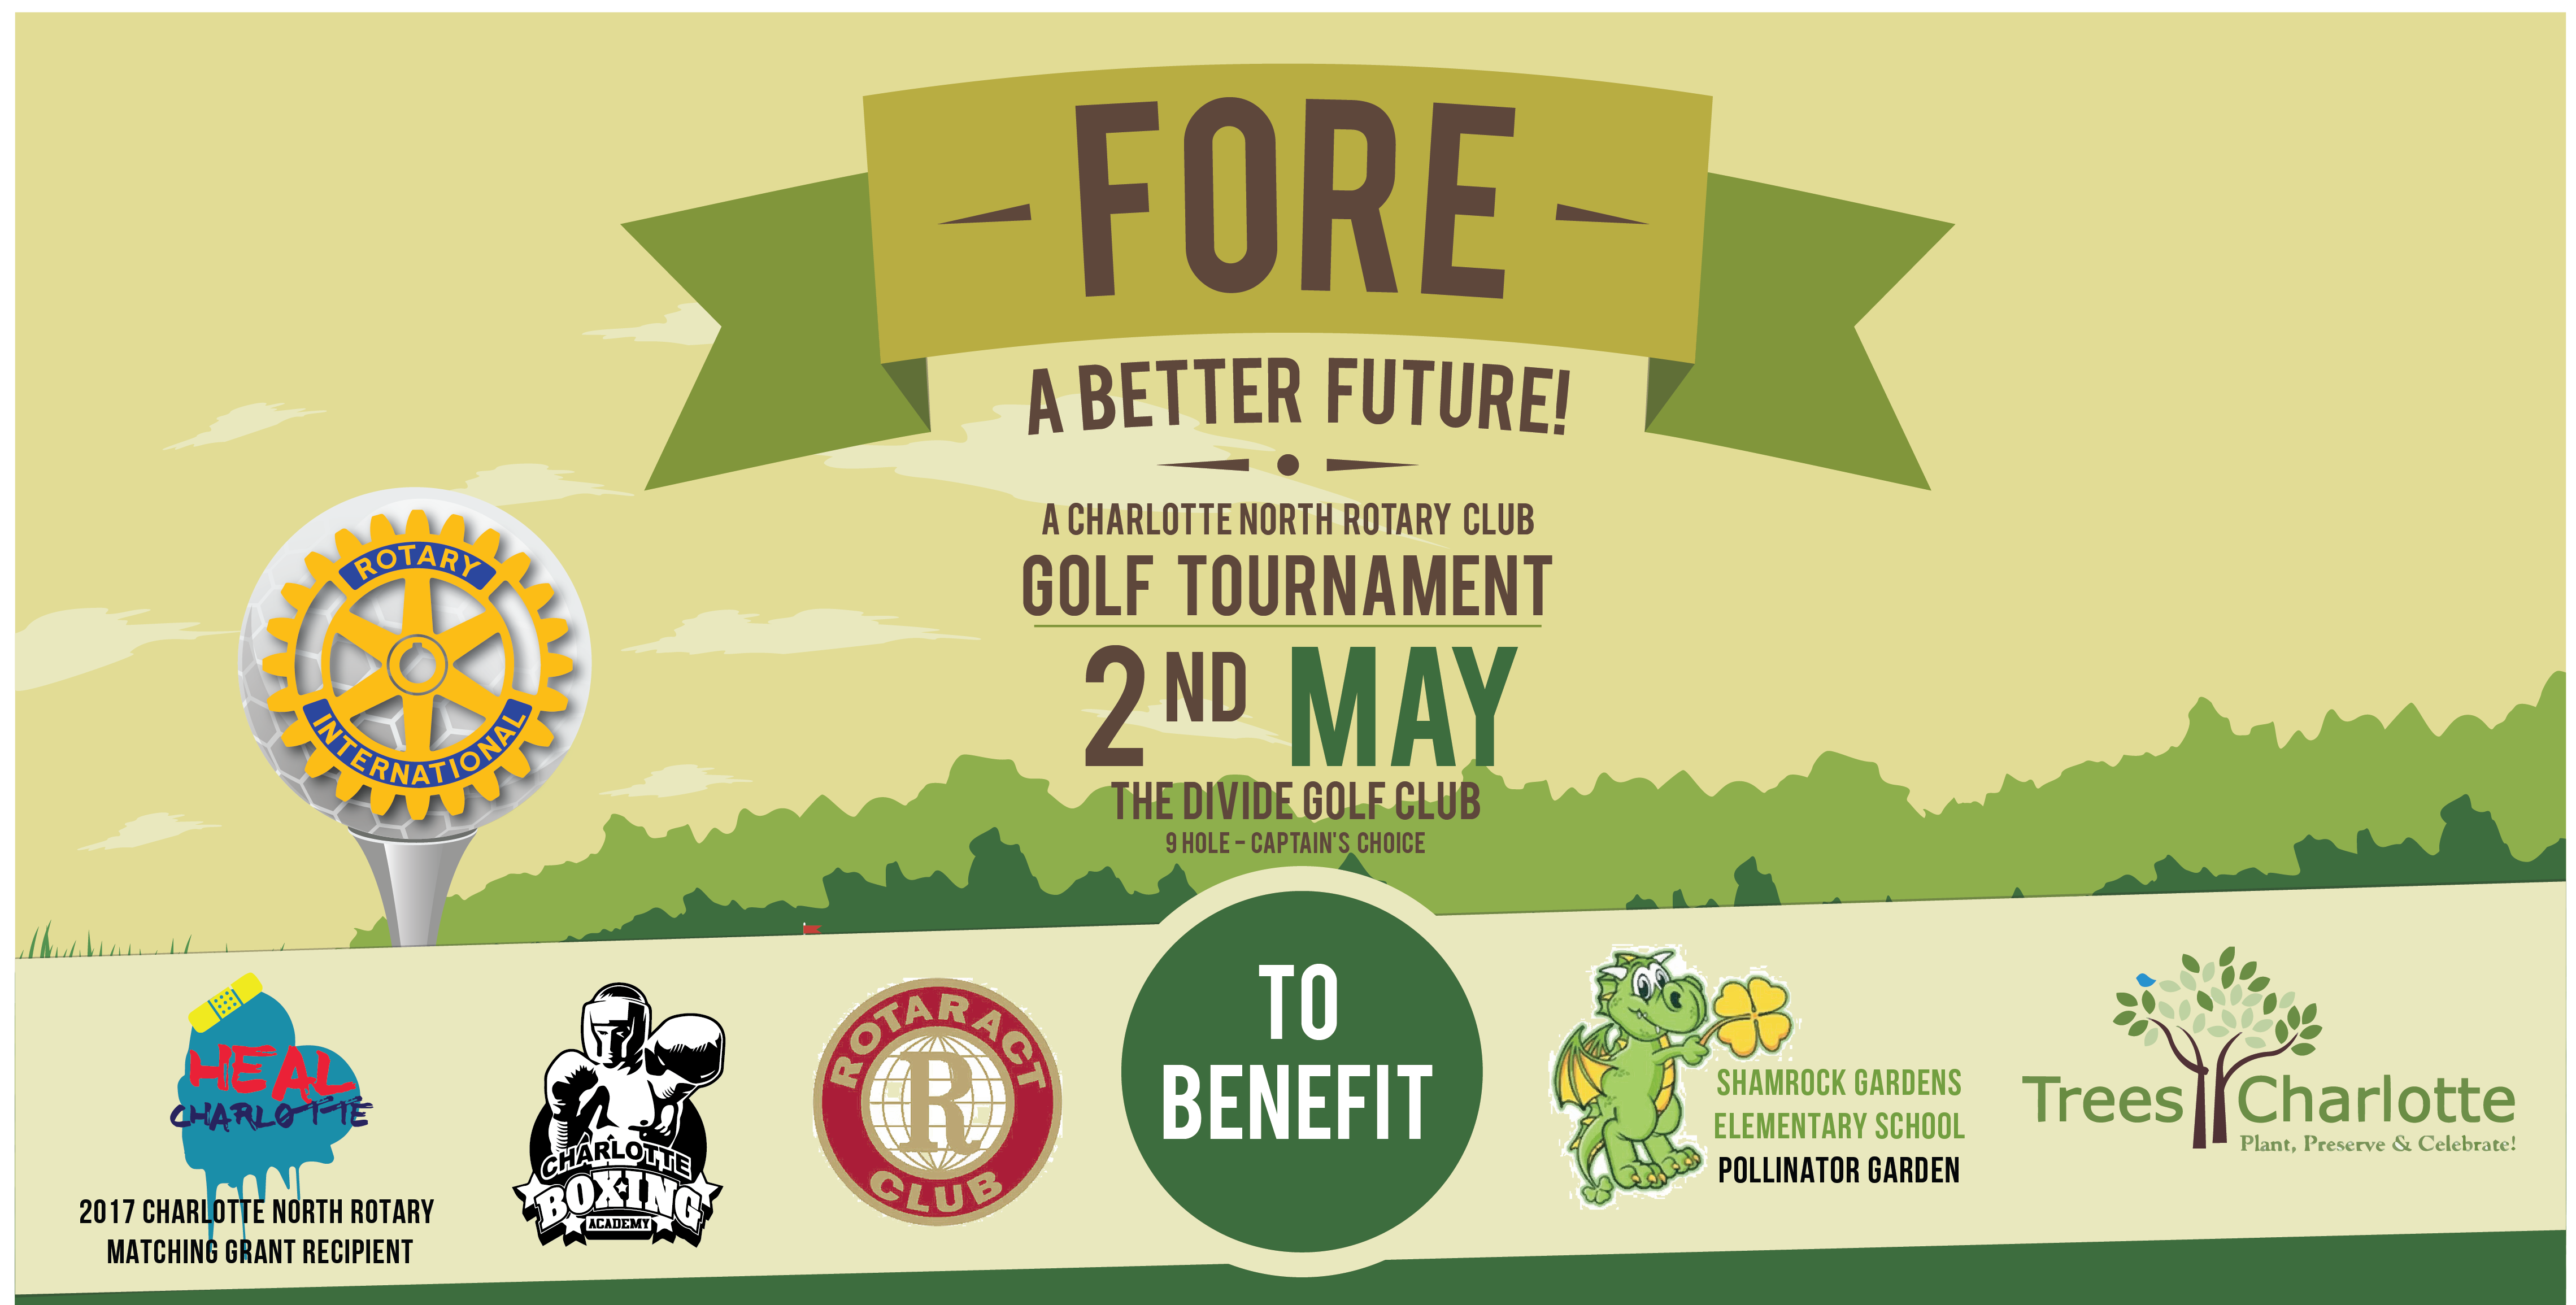 Fore A Better Future - Charlotte North Rotary - Golf Tournament